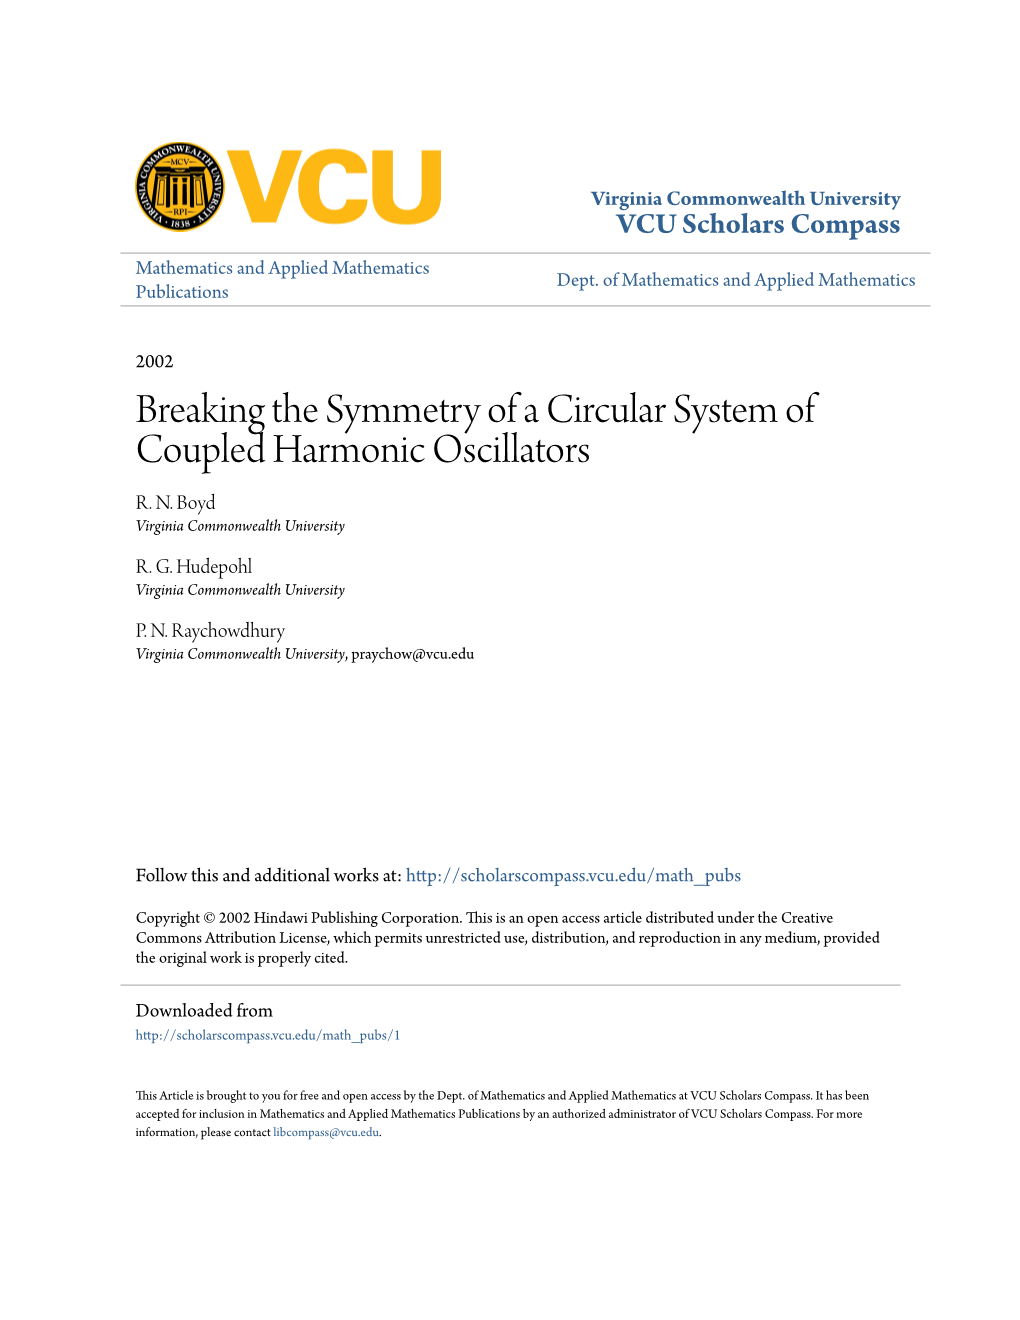 Breaking the Symmetry of a Circular System of Coupled Harmonic Oscillators R